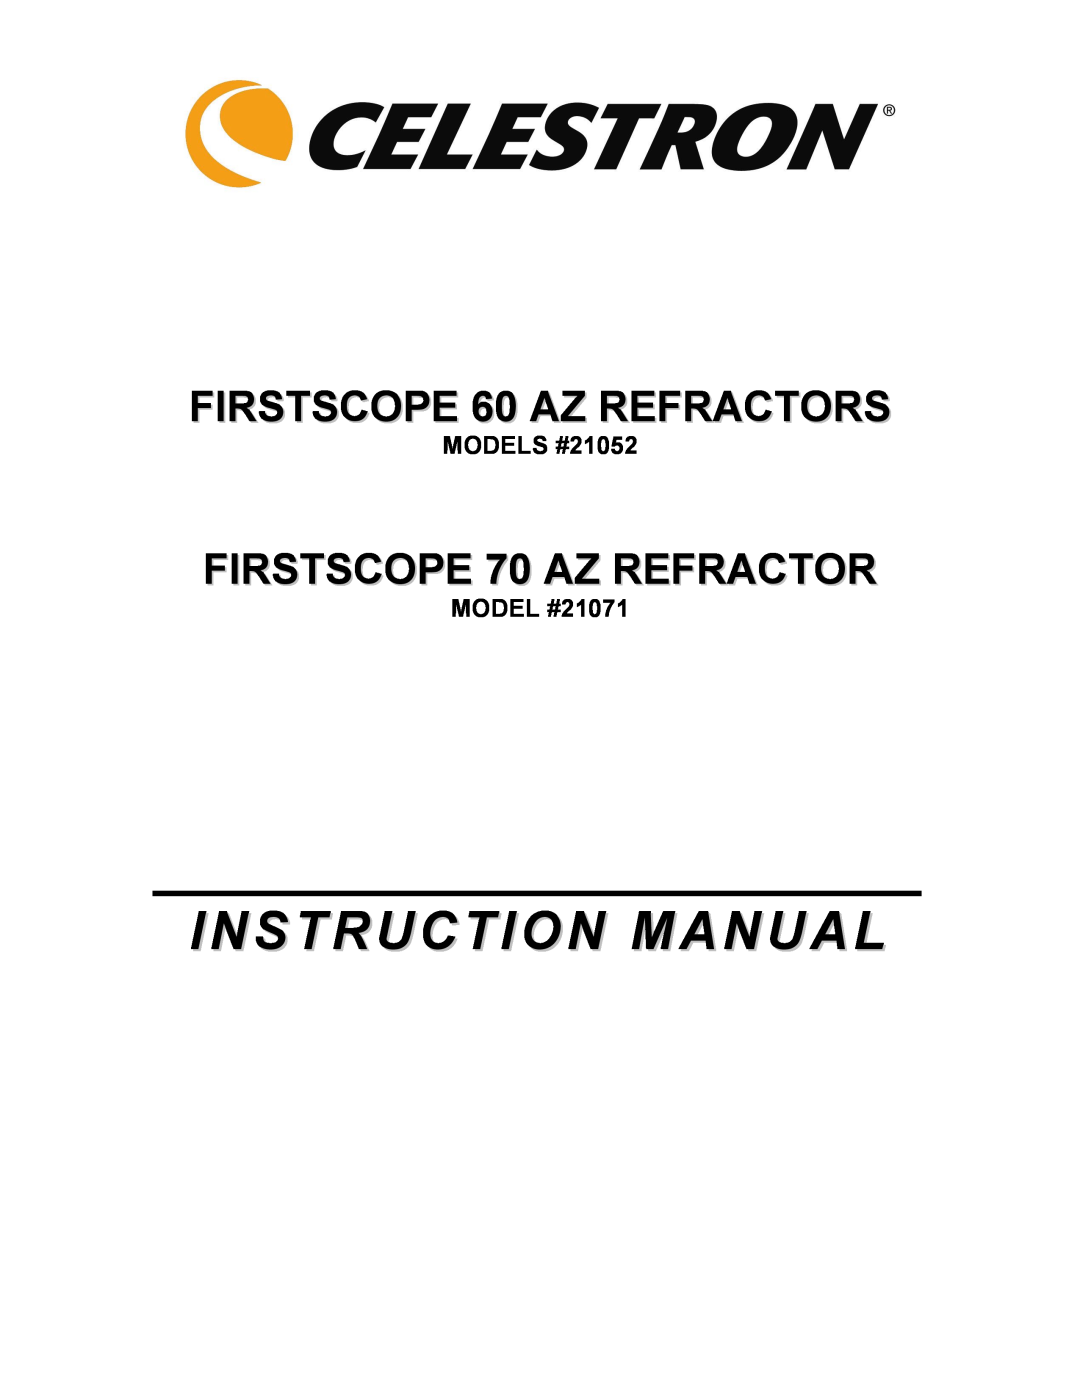 Celestron 21071 manual Instruction Manual, FIRSTSCOPE 60 AZ REFRACTORS, FIRSTSCOPE 70 AZ REFRACTOR, MODELS #21052 